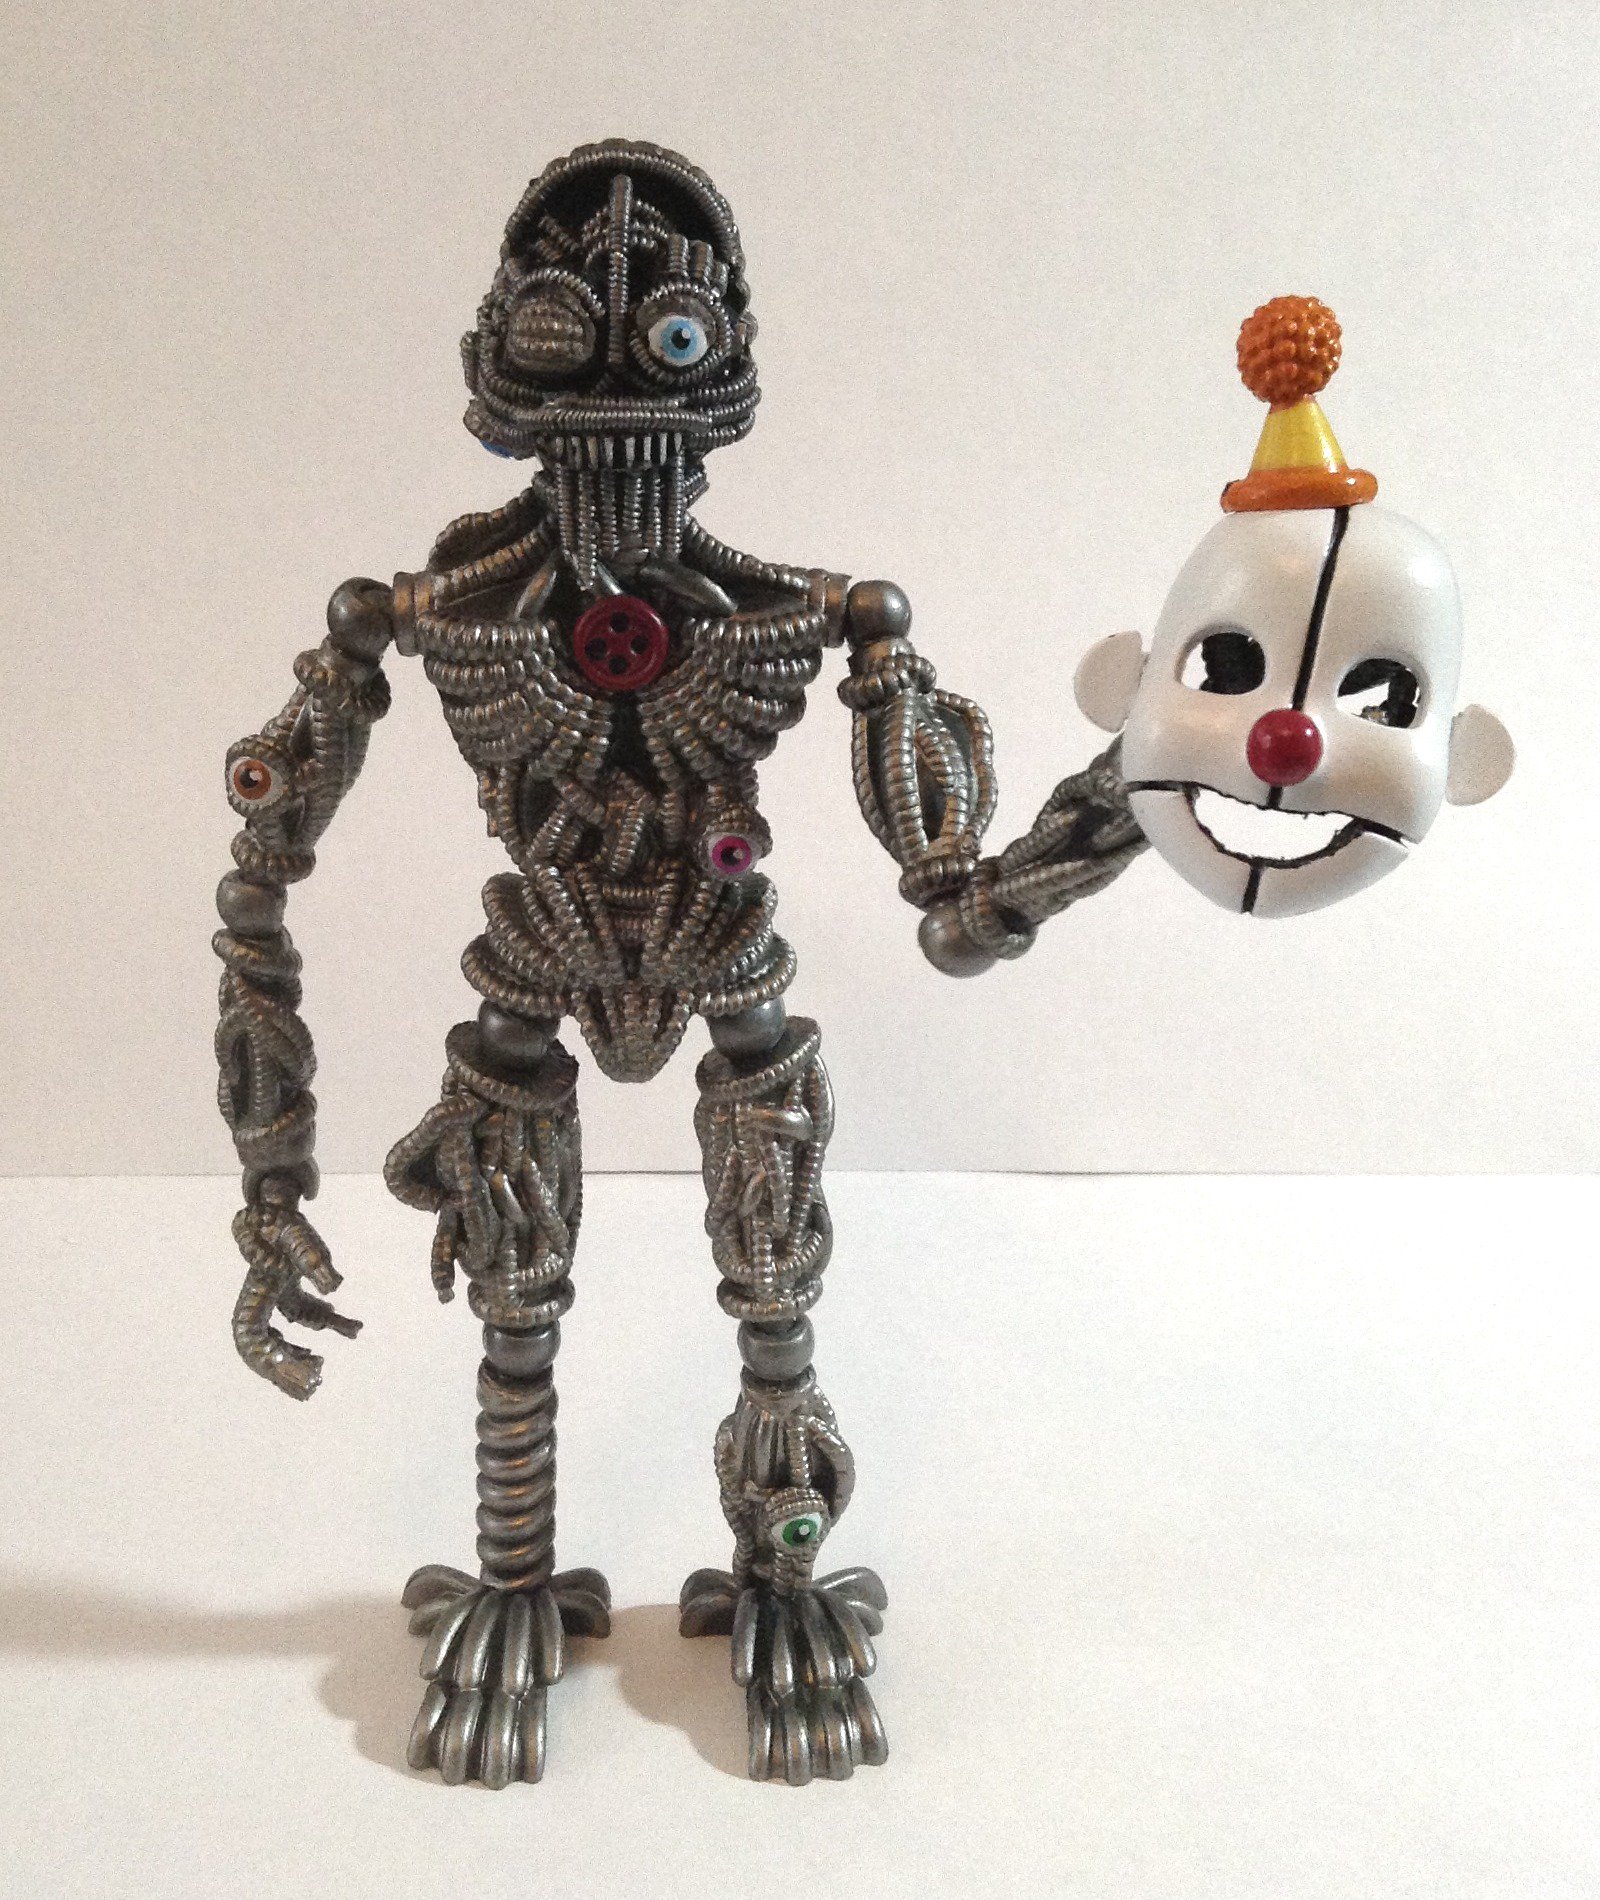 crazycreeper529 on Twitter: "I made a #custom Maskless #Ennard 5-Inch Figure using @OriginalFunko's Ennard. I took an extra Ennard head, pulled off the and made the face underneath. The wire for